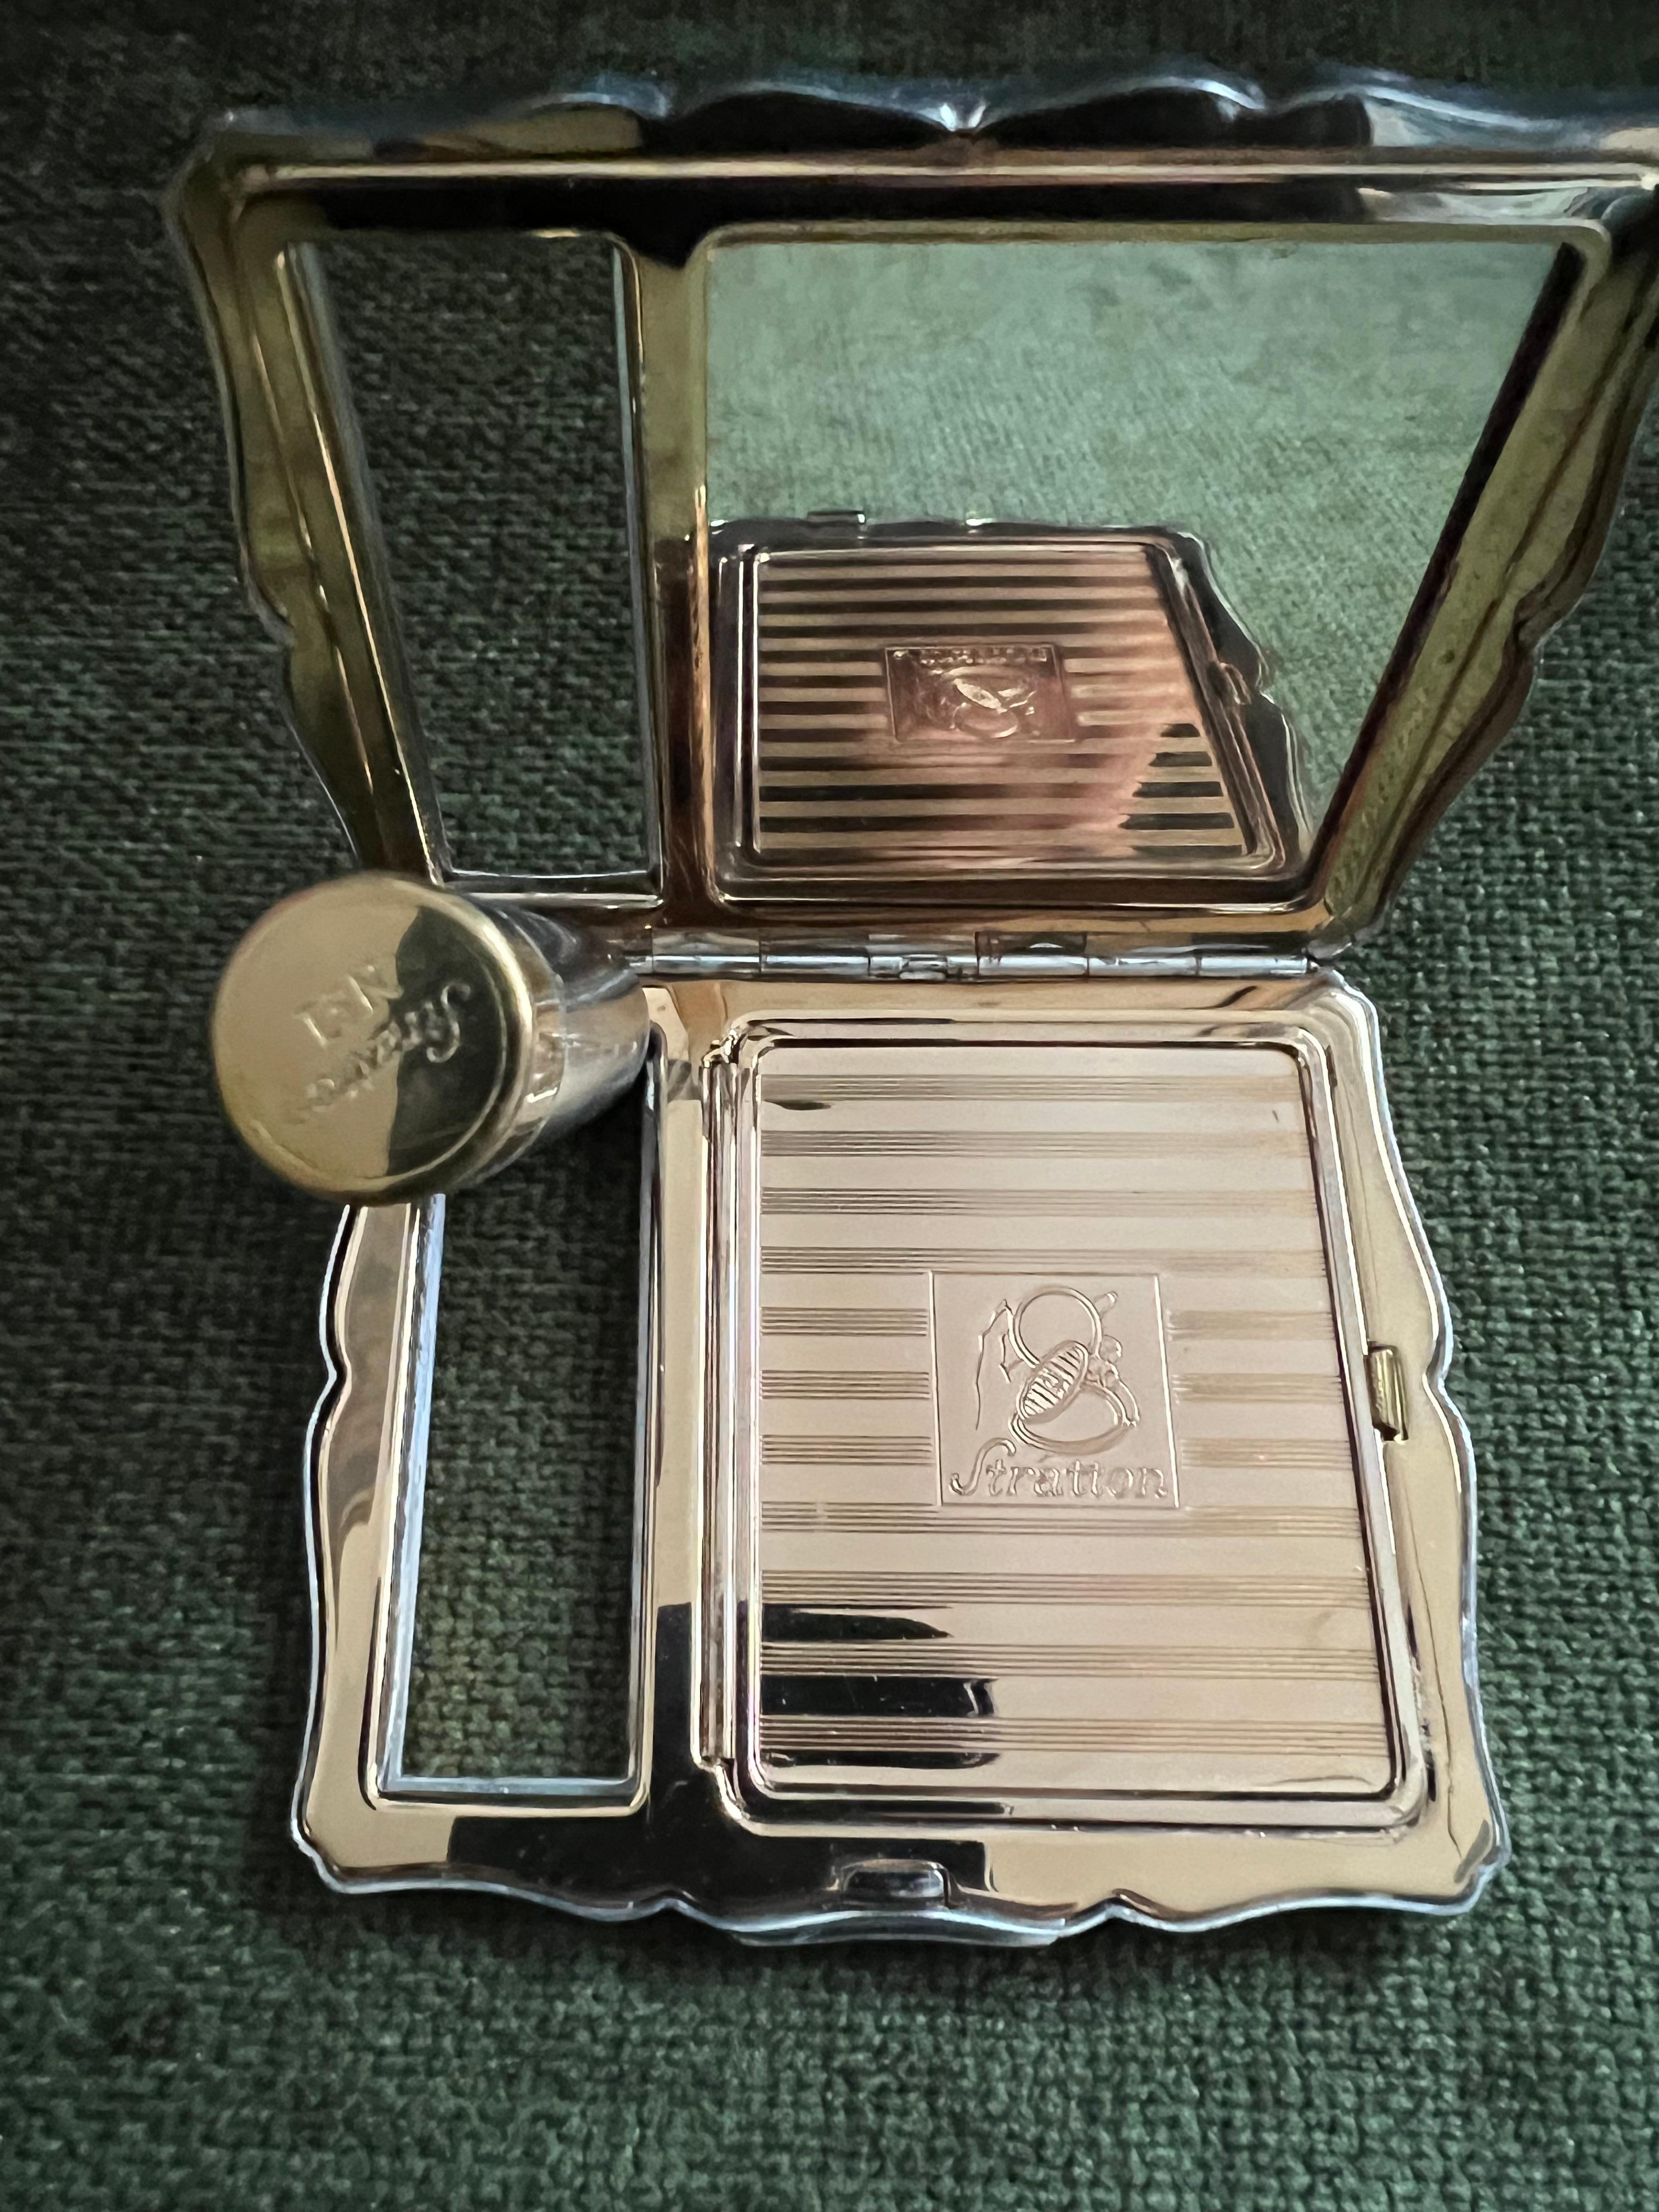 Vintage “Straron” No1 Powder Case with Mirror and Lipstick Holder Case For Sale 4